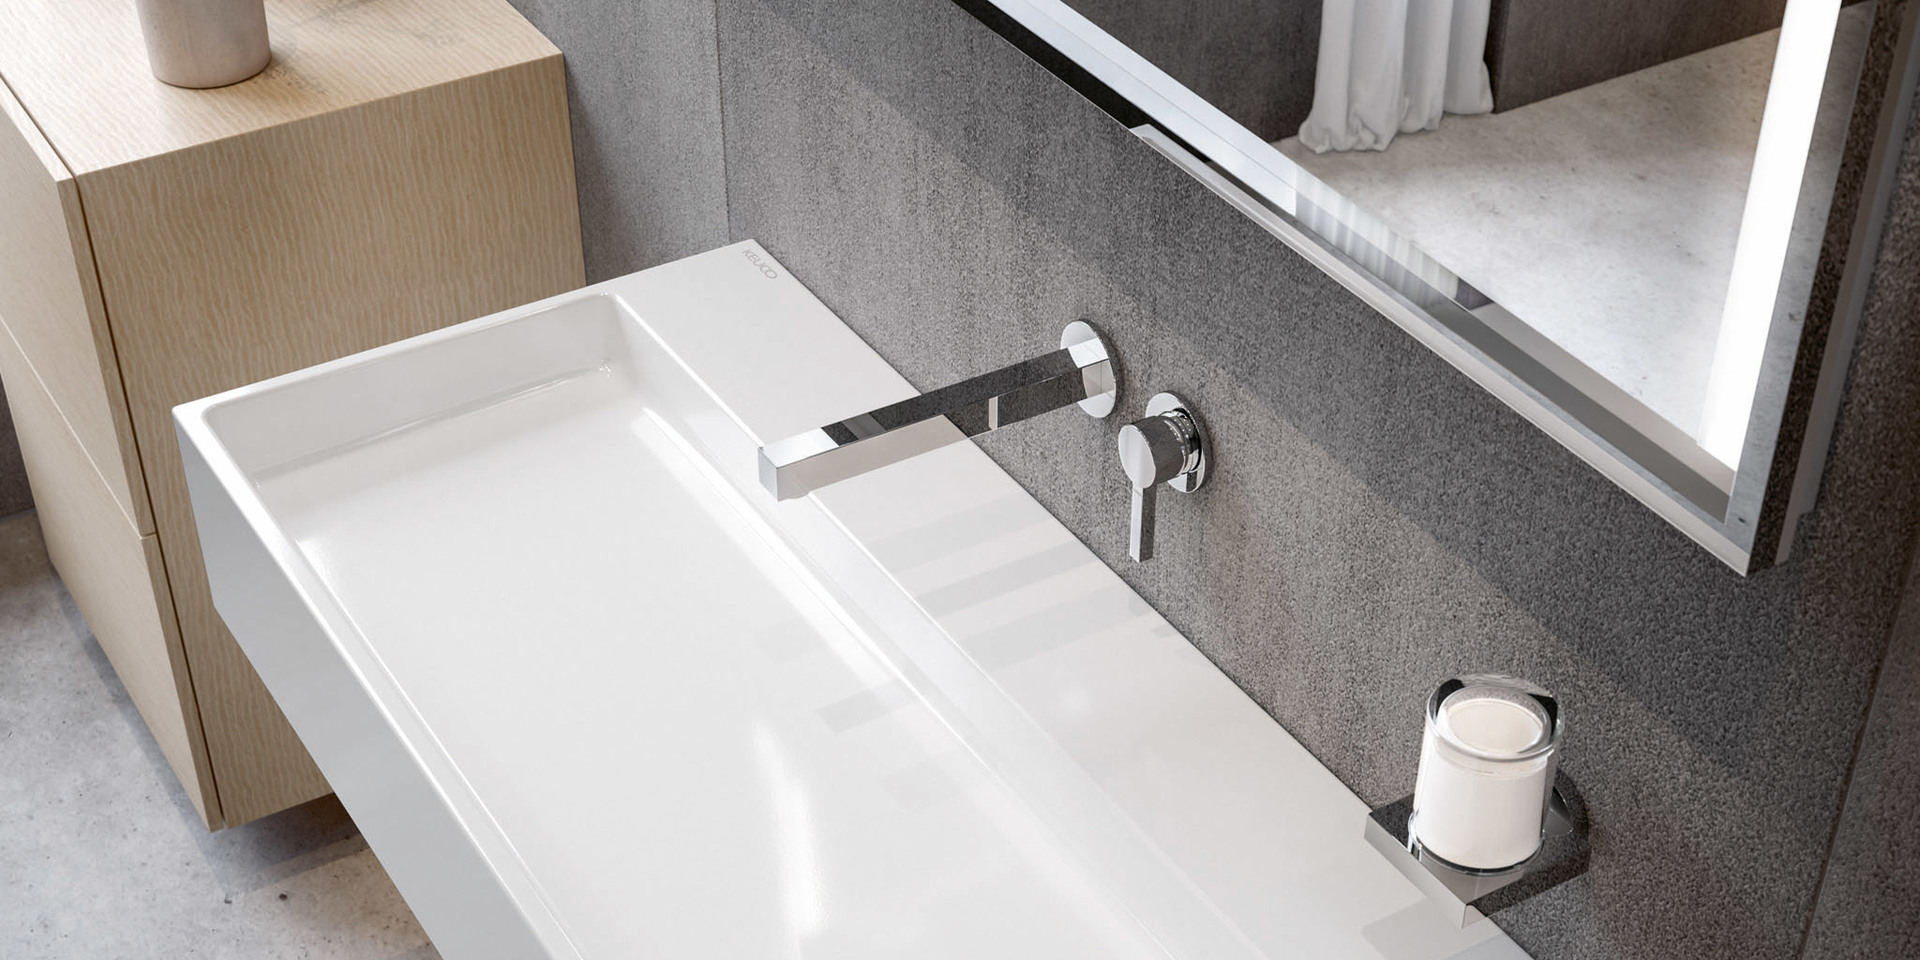 The new bathroom furnishing concept EDITION 90 from KEUCO - freedom of pure forms